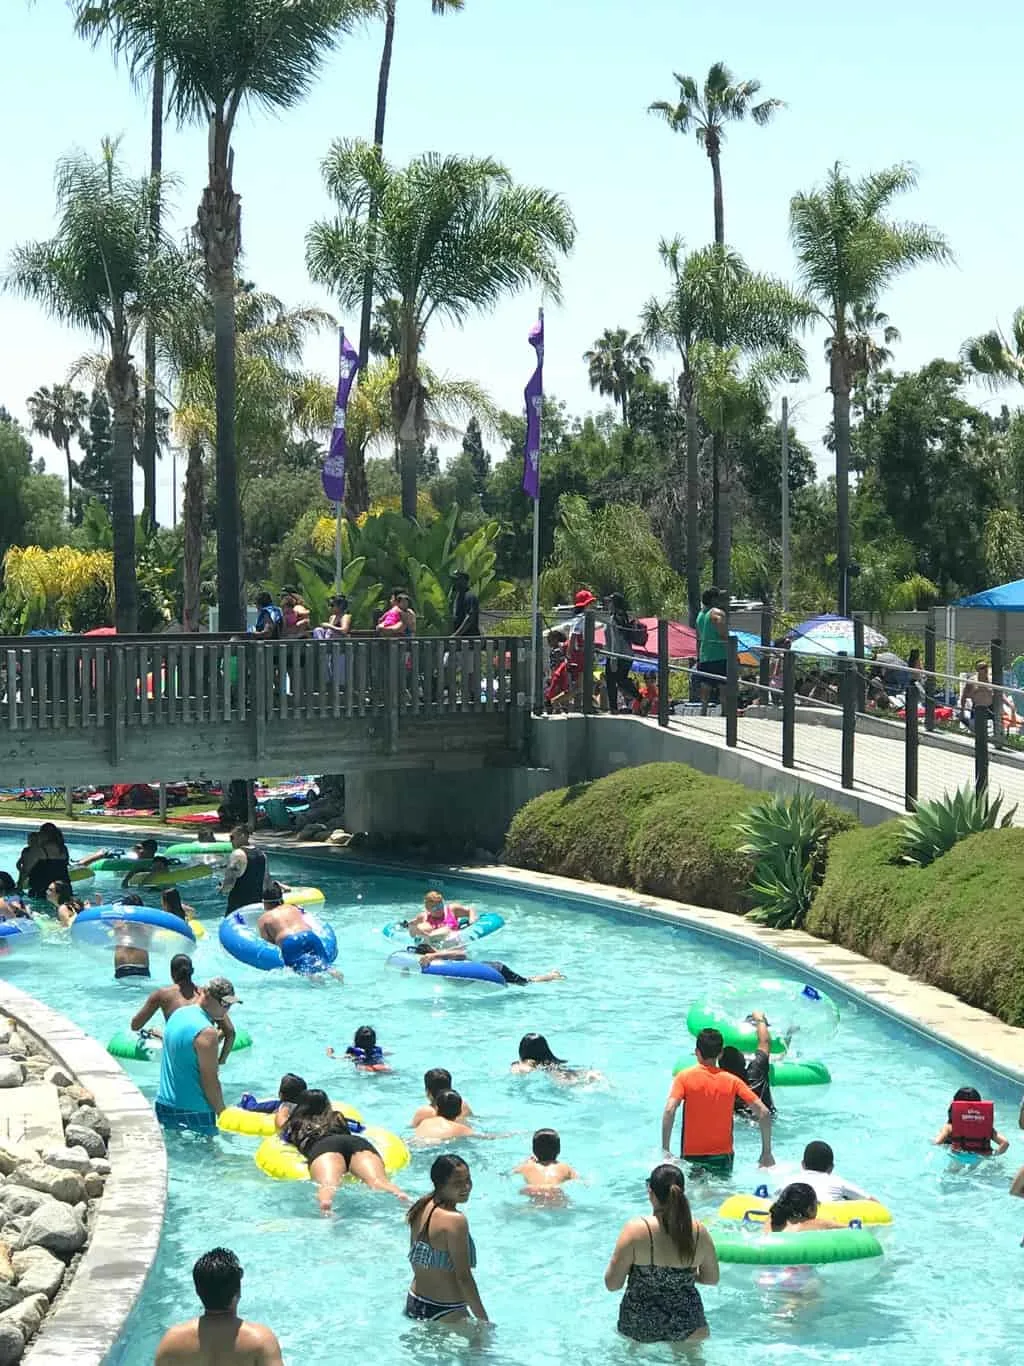 Visit the newly updated Knott's Soak City in Buena Park, California! The entire waterpark been beautifully remodeled to include 7 new waterslides, an expanded food area and much more needed shade. It is the perfect place to spend the summer relaxing outdoors with your family! You can get discount tickets to Knott's Soak City right here!